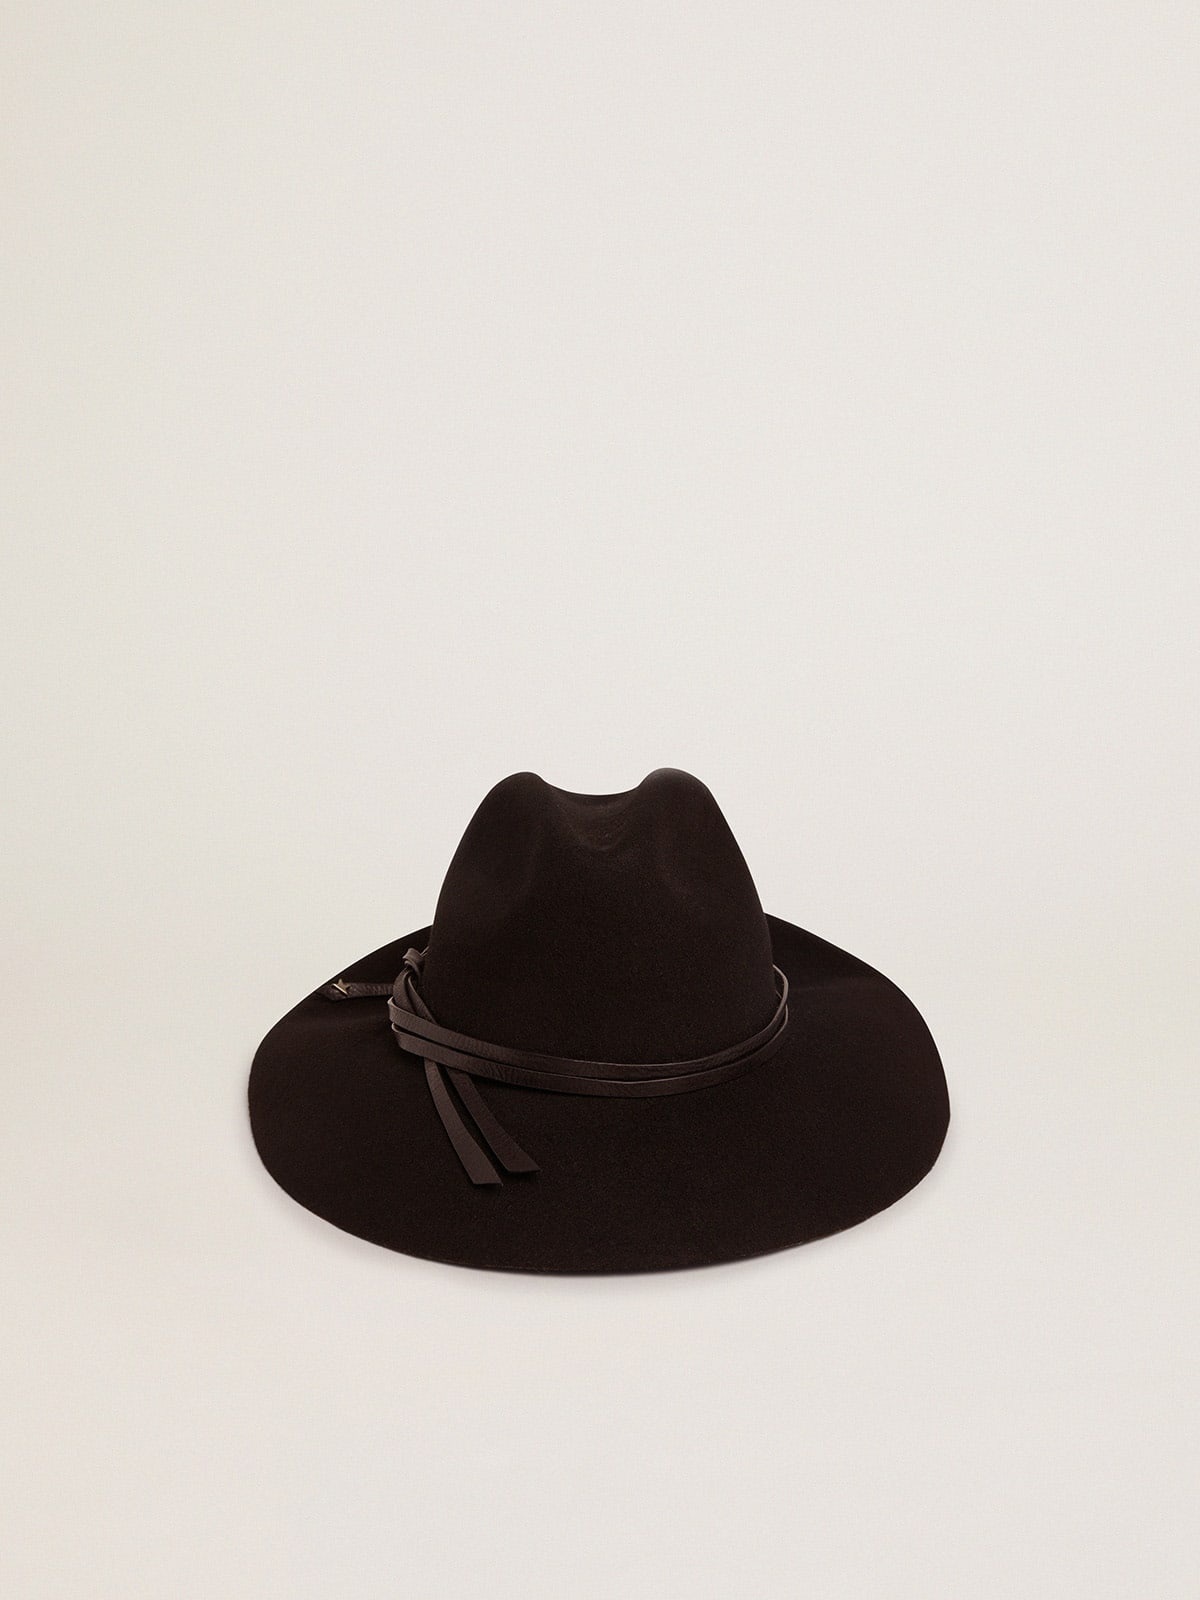 Black hat with leather strap - 1